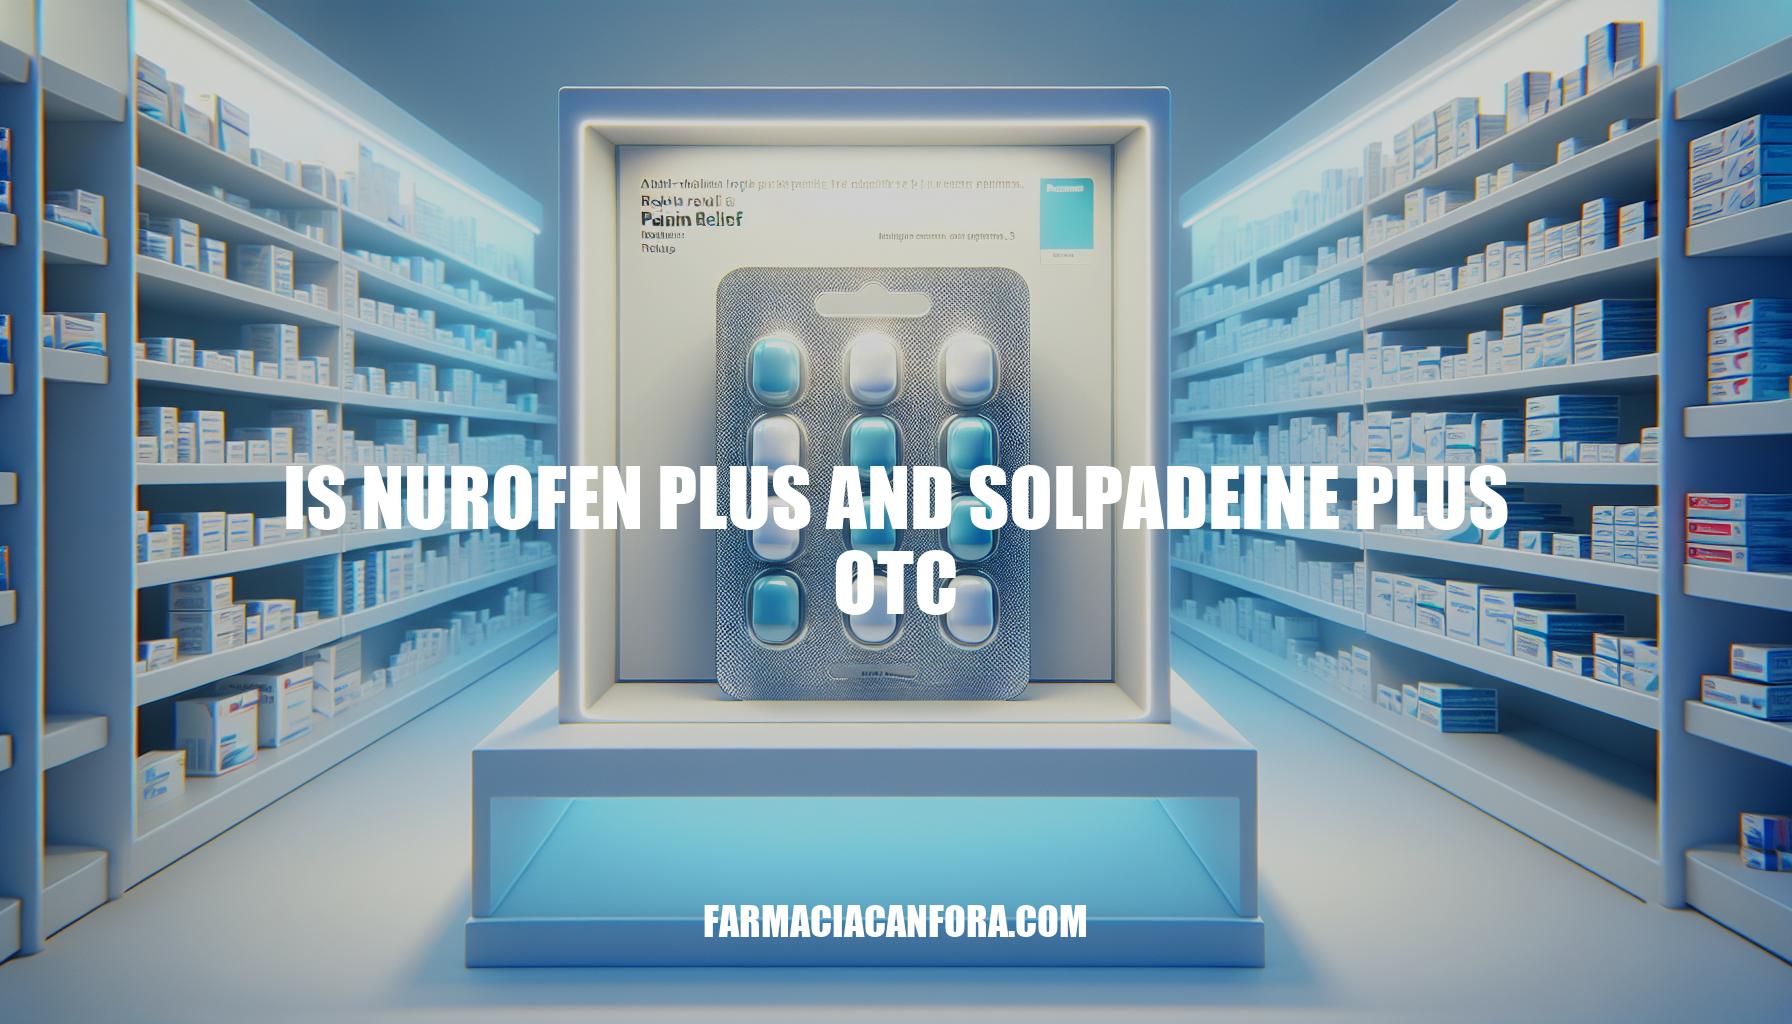 Are Nurofen Plus and Solpadeine Plus Over-the-Counter (OTC) Pain Relief Options?